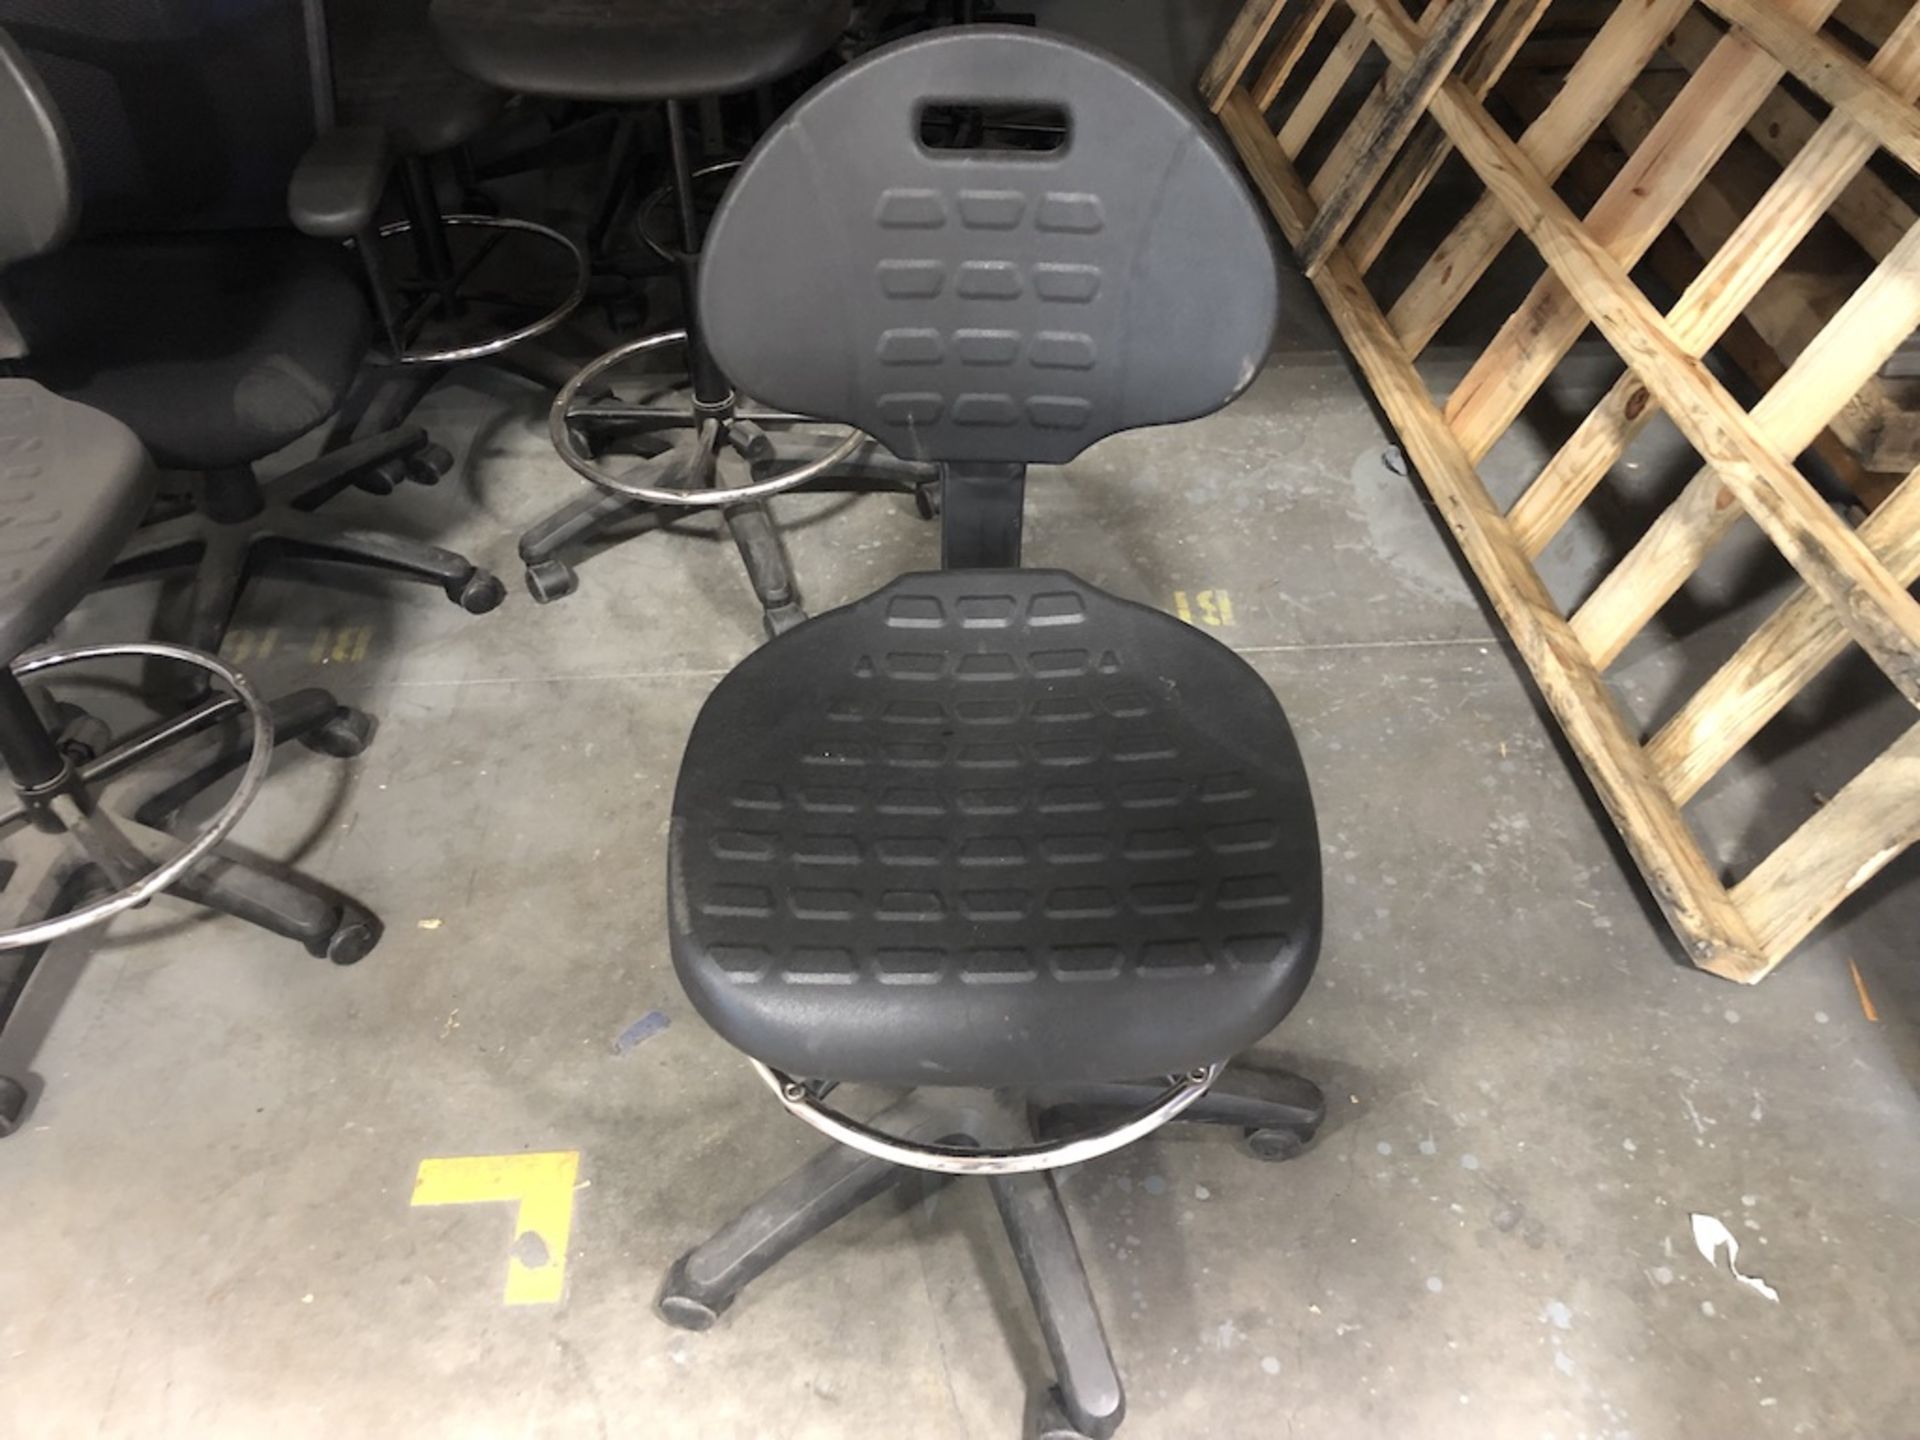 5 CASTER BLACK OFFICE CHAIR